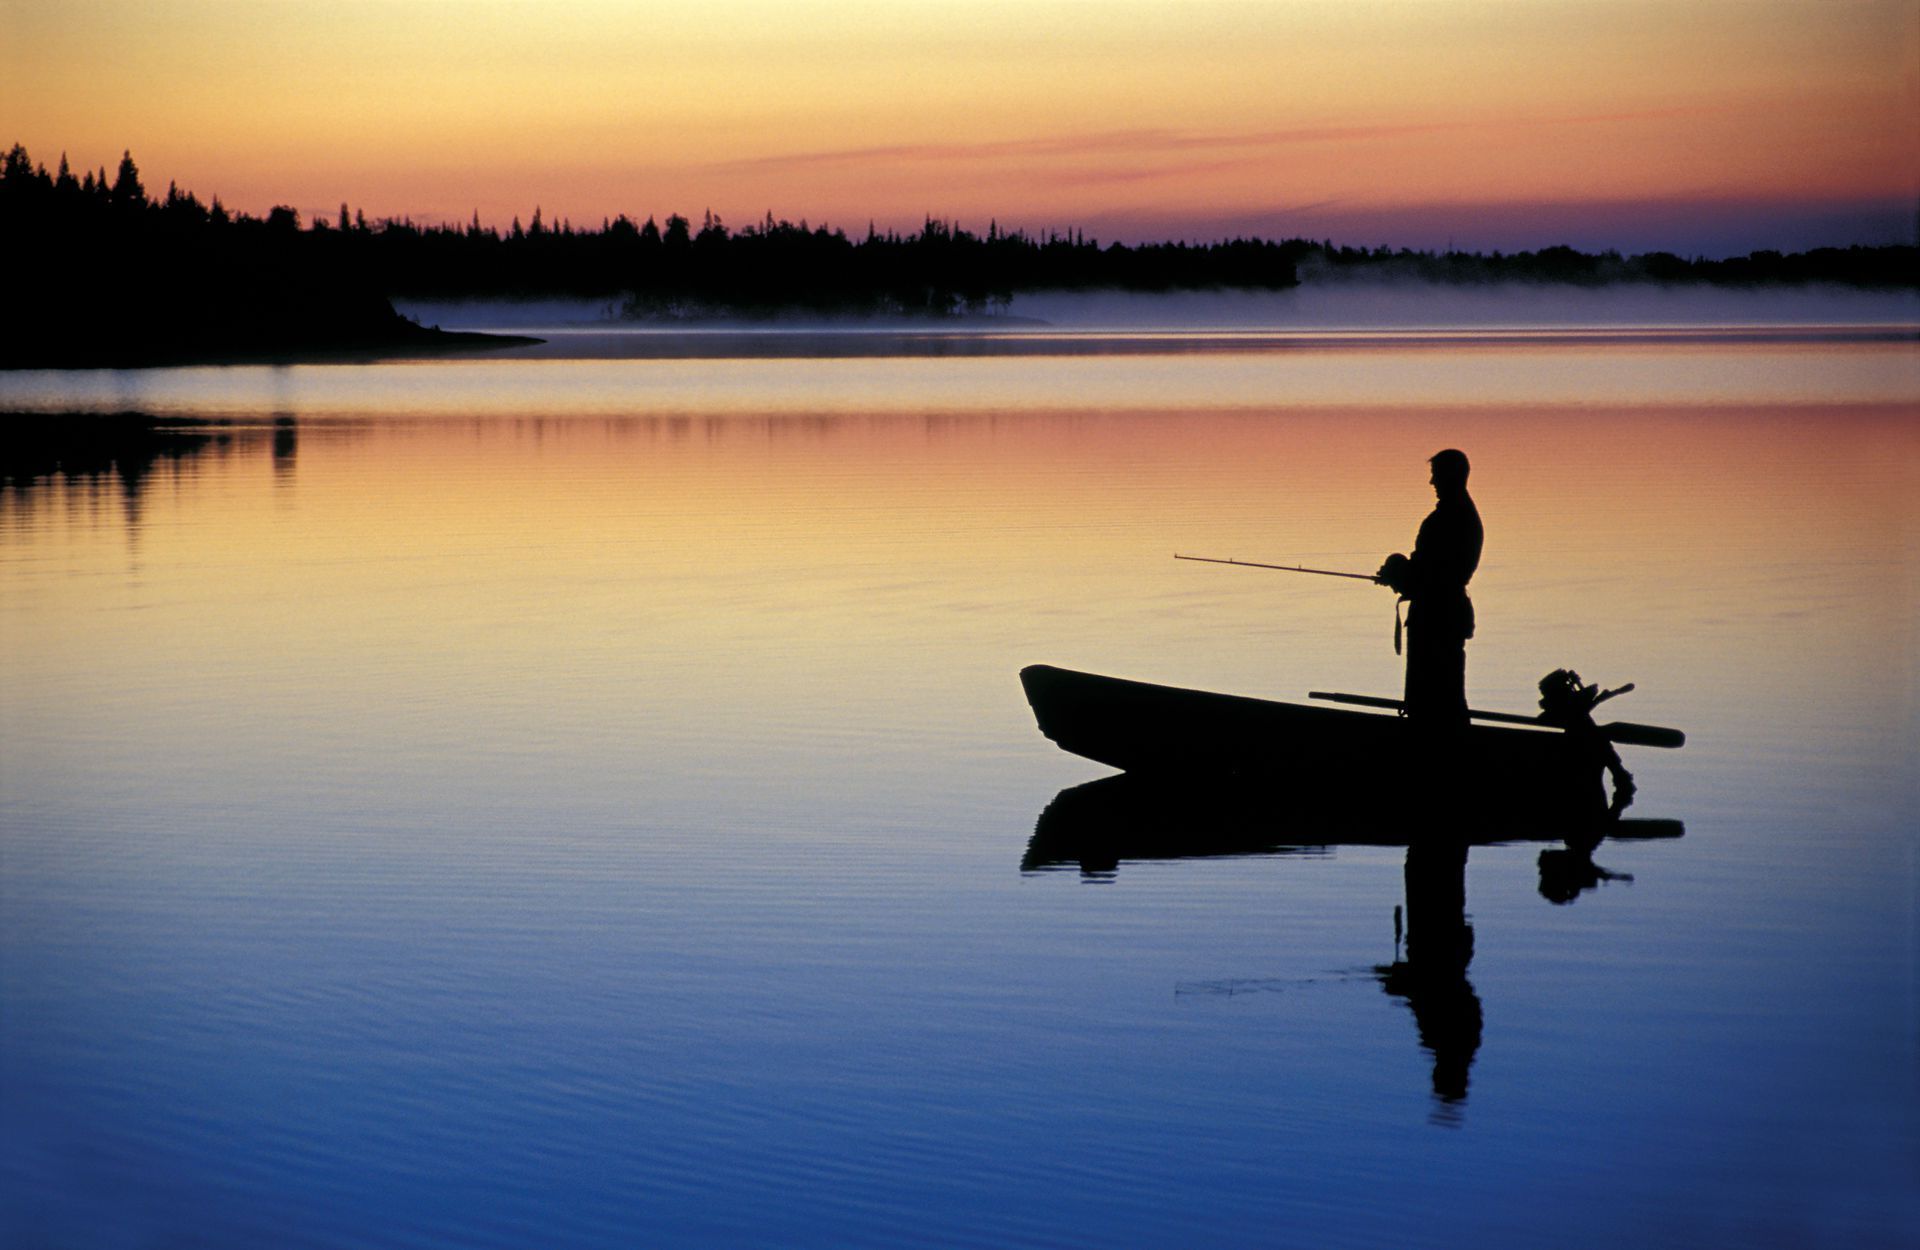 a man is fishing in a boat on a lake at sunset